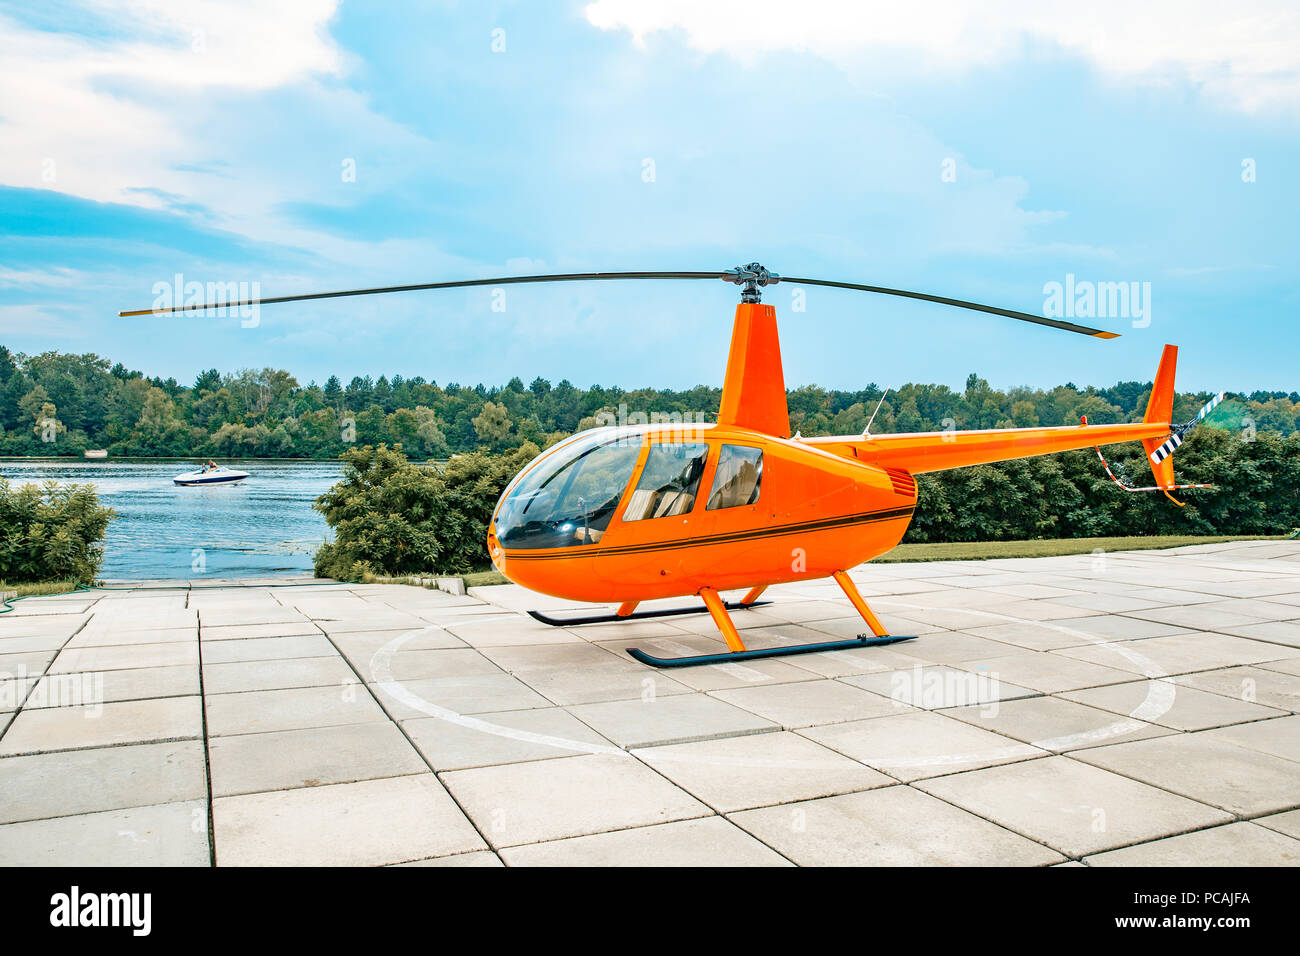 orange colored helicopter parked on a concrete slab under blue skies and water. Stock Photo